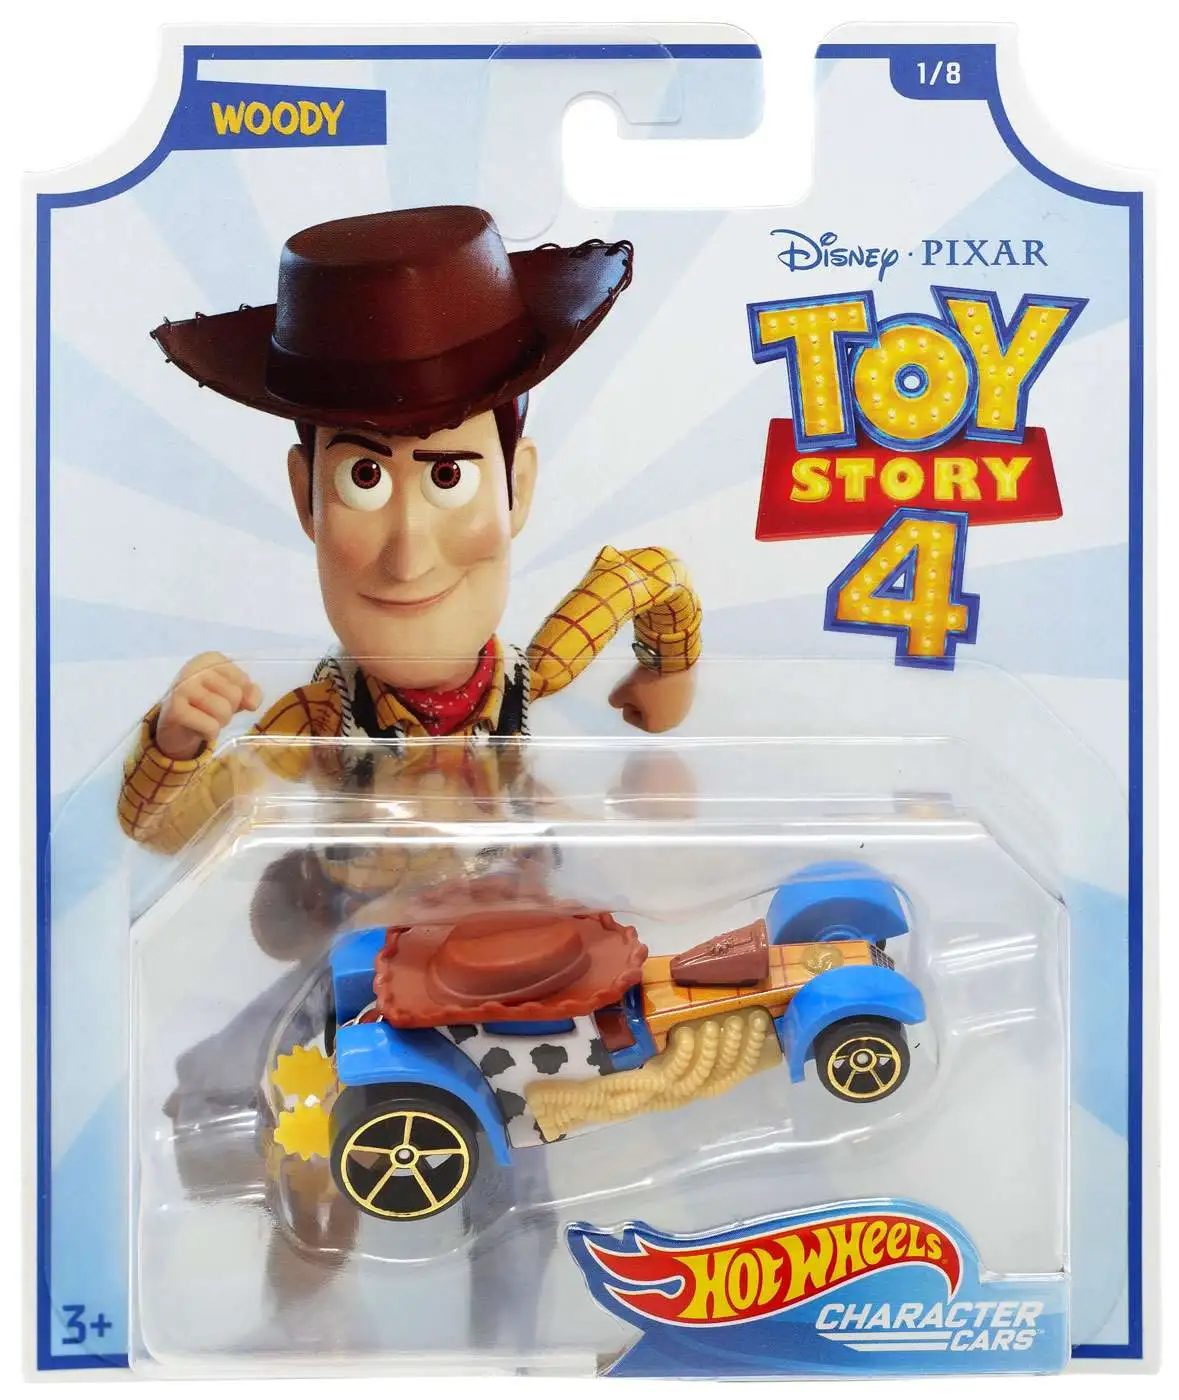 Disney Pixar Toy Story 4 Hot Wheels 1:64 Character Cars *CHOOSE YOUR FAVOURITE* 